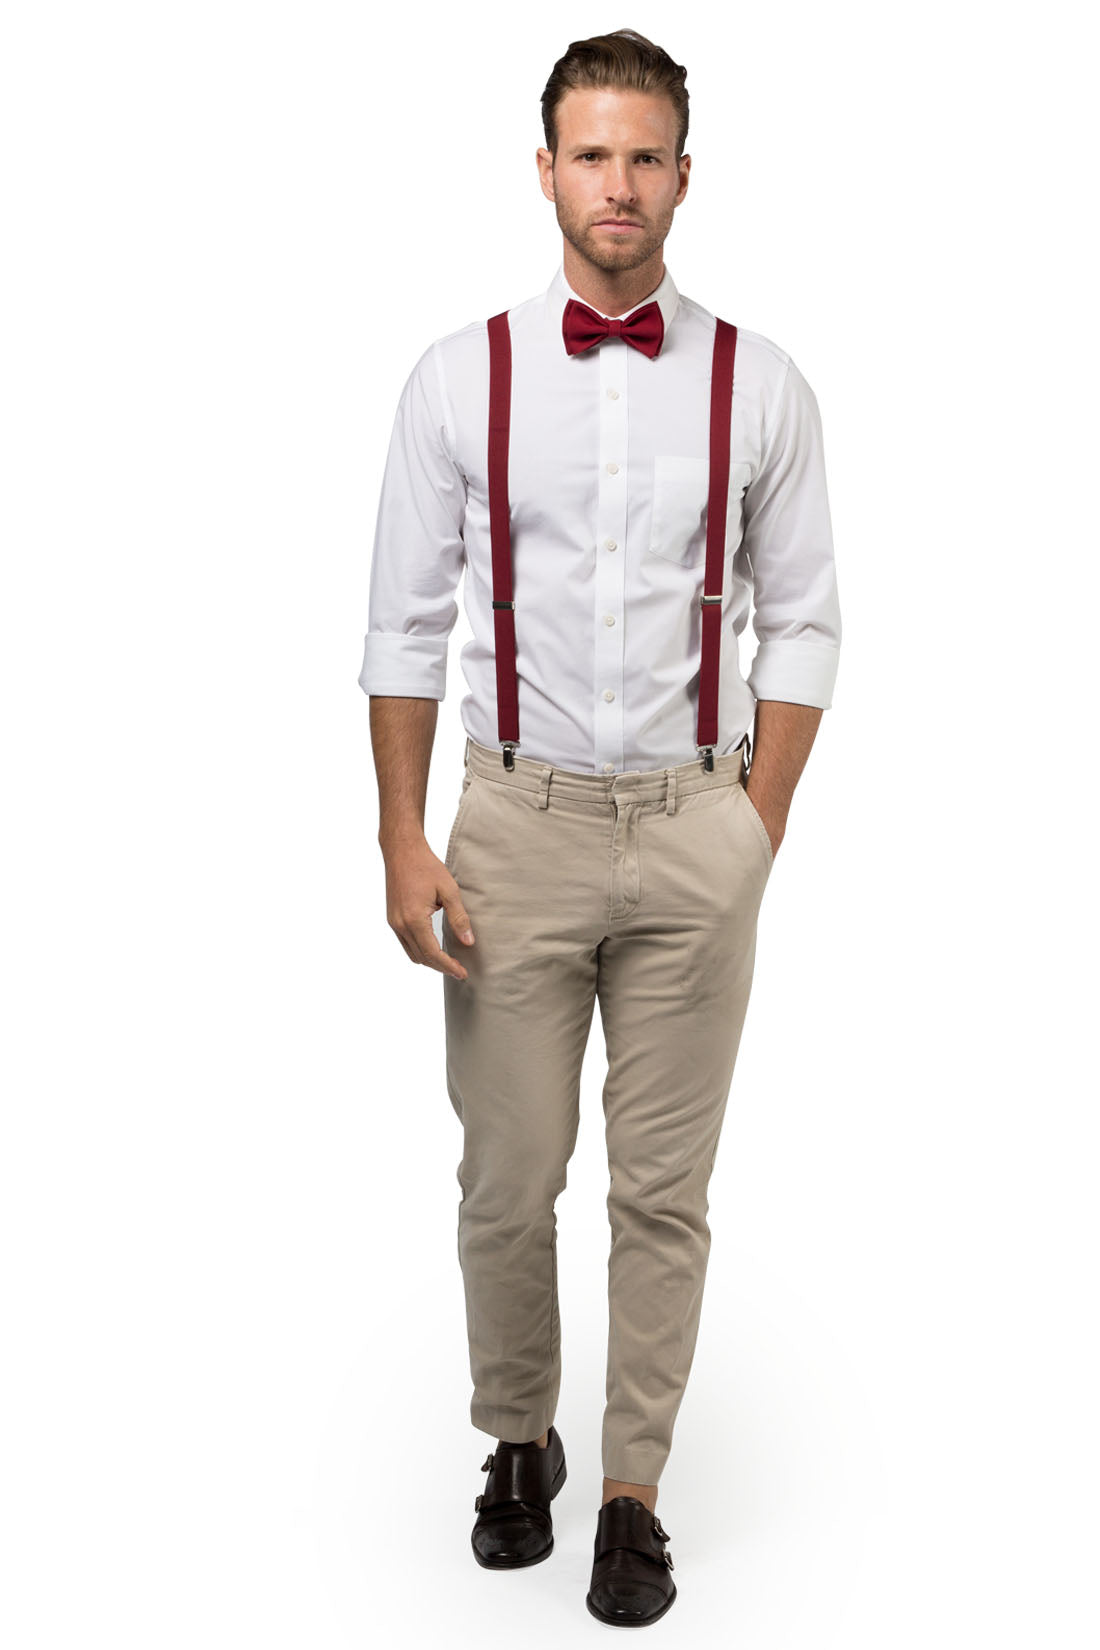 All Other Color Suspenders & Bow Ties